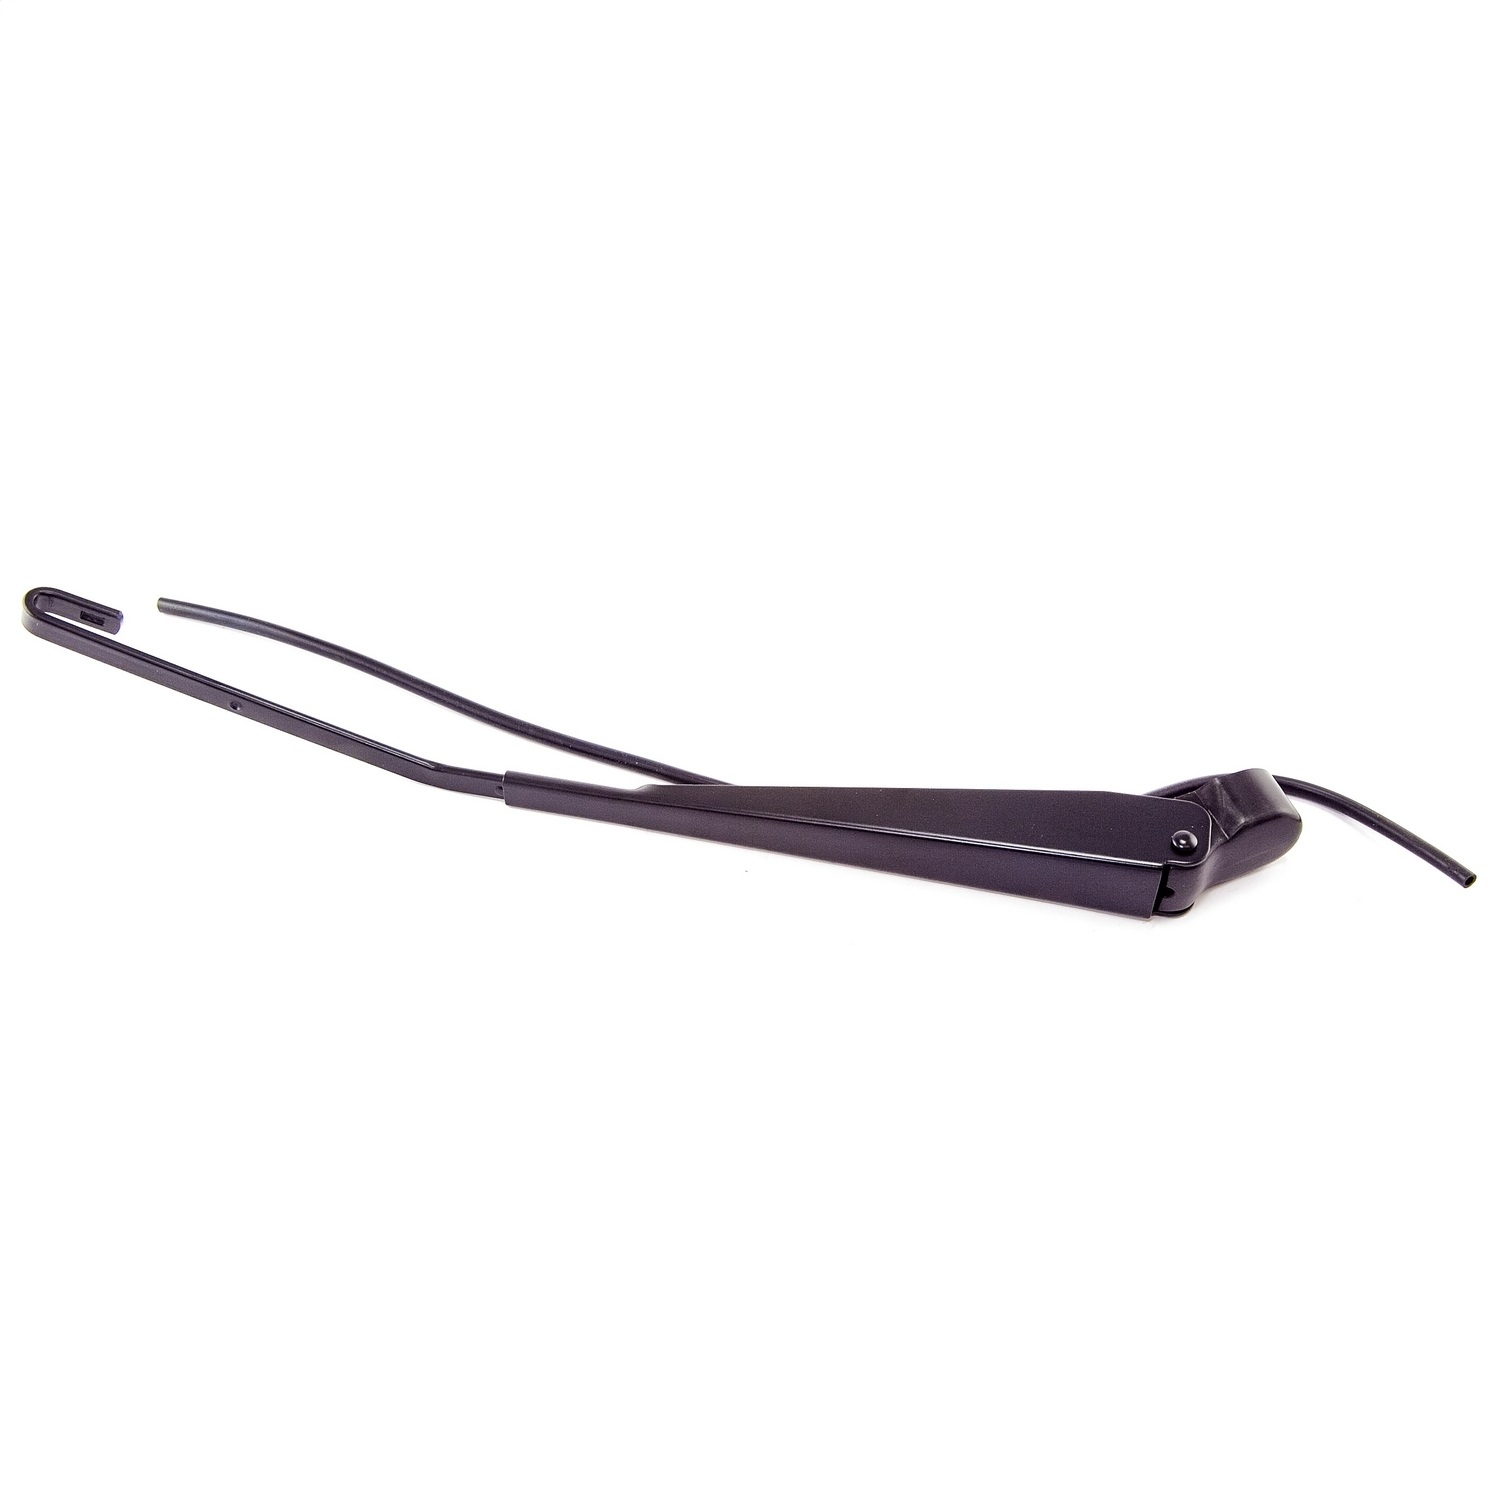 Omix This Replacement Windshield Wiper Arm With Washer Tube From Omix Fits The Rear Window On 97-01